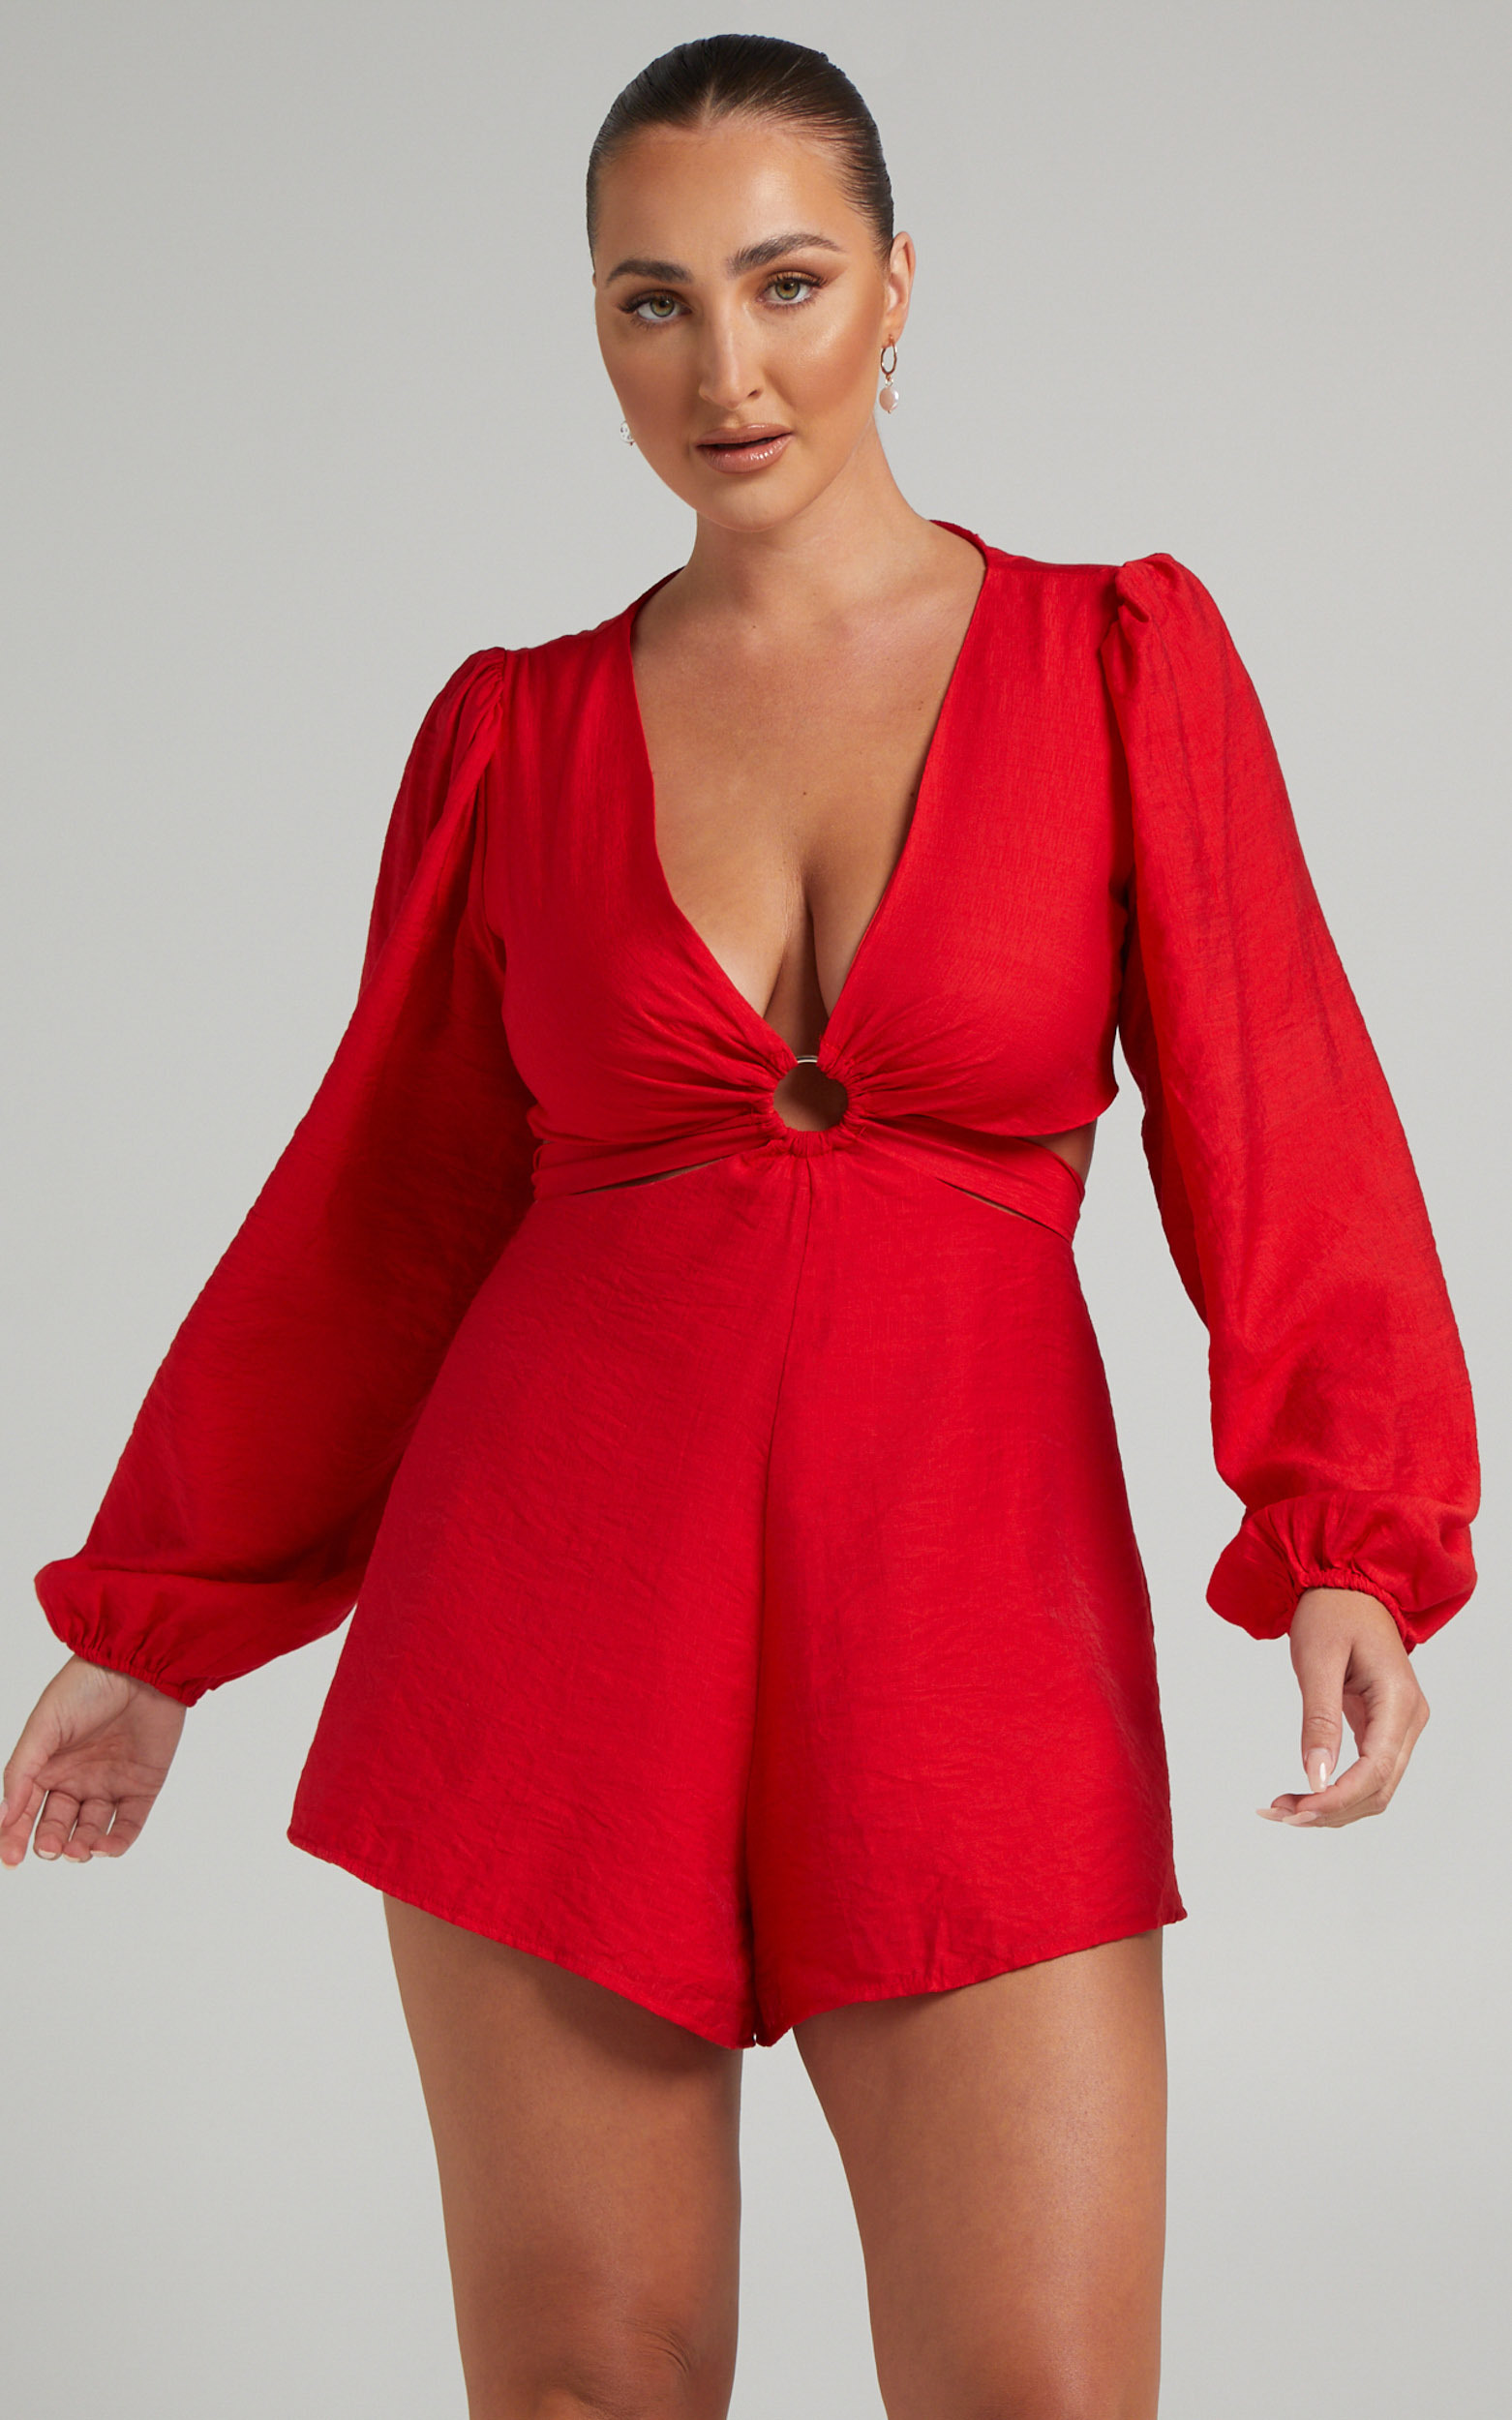 Primrose Cut Out Tie Back Long Sleeve Playsuit in Red - 06, RED2, hi-res image number null